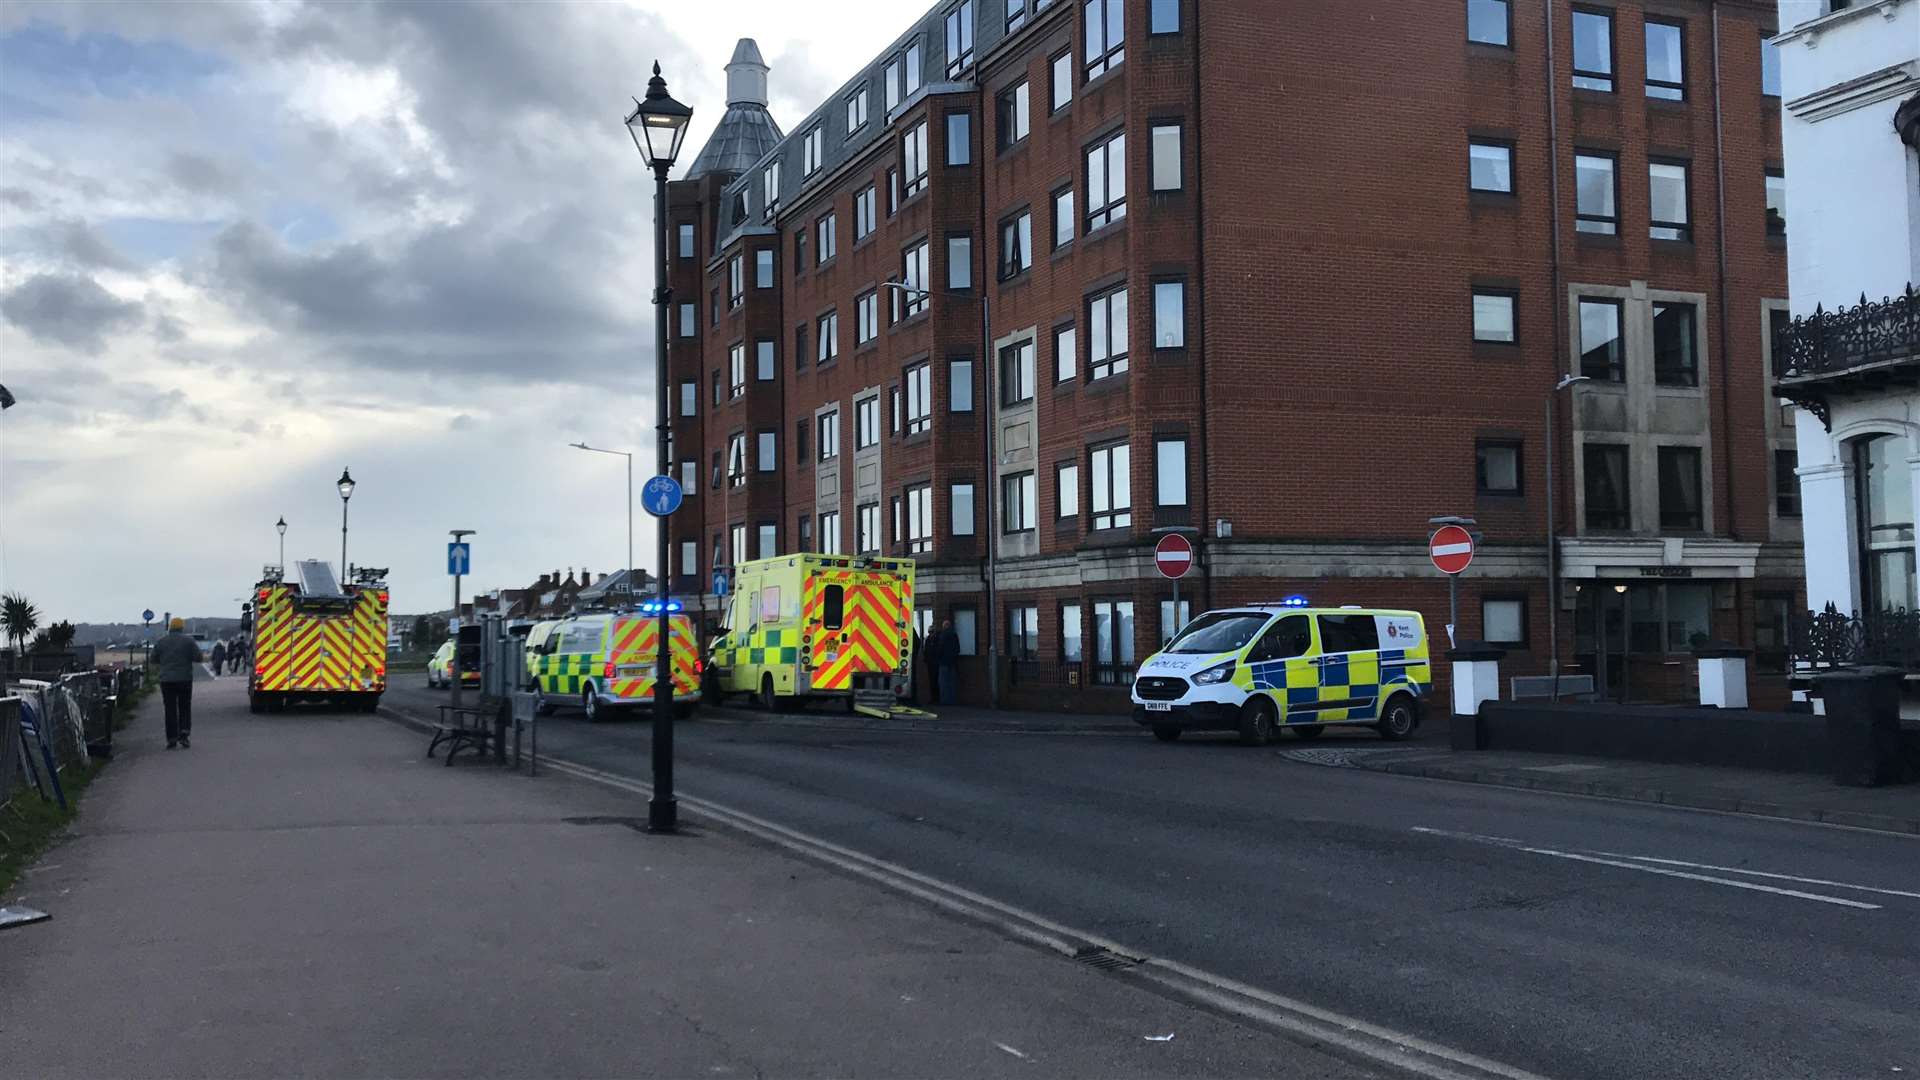 Emergency services at the scene in Prince of Wales Terrace